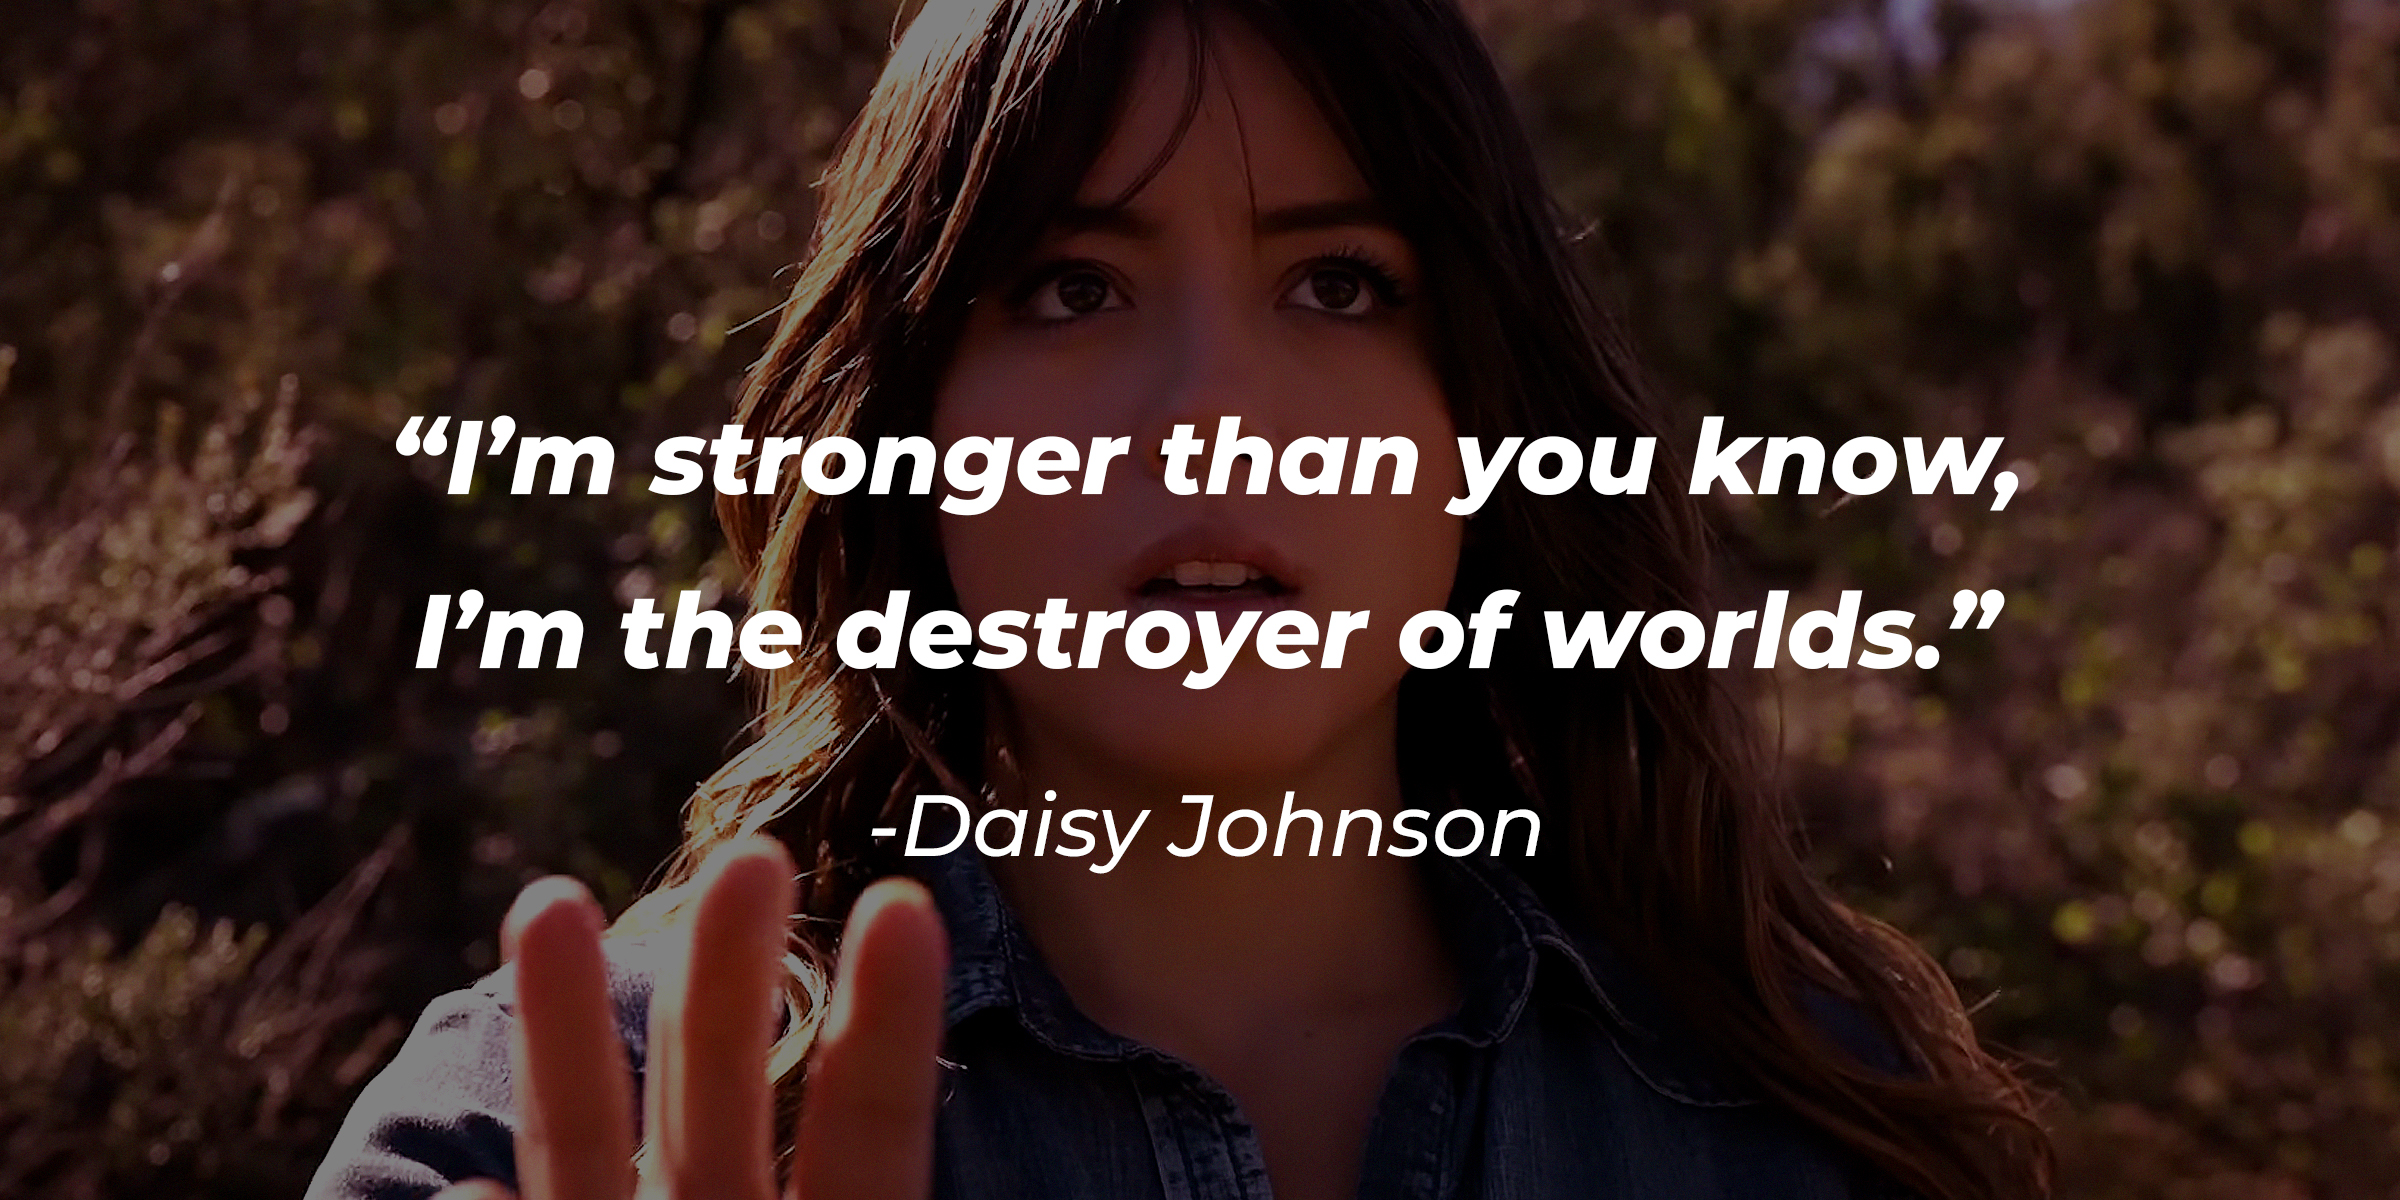 Daisy Johnson with her quote: "I'm stronger than you know; I'm the destroyer of Worlds." | Source: Facebook.com/AgentsofShield